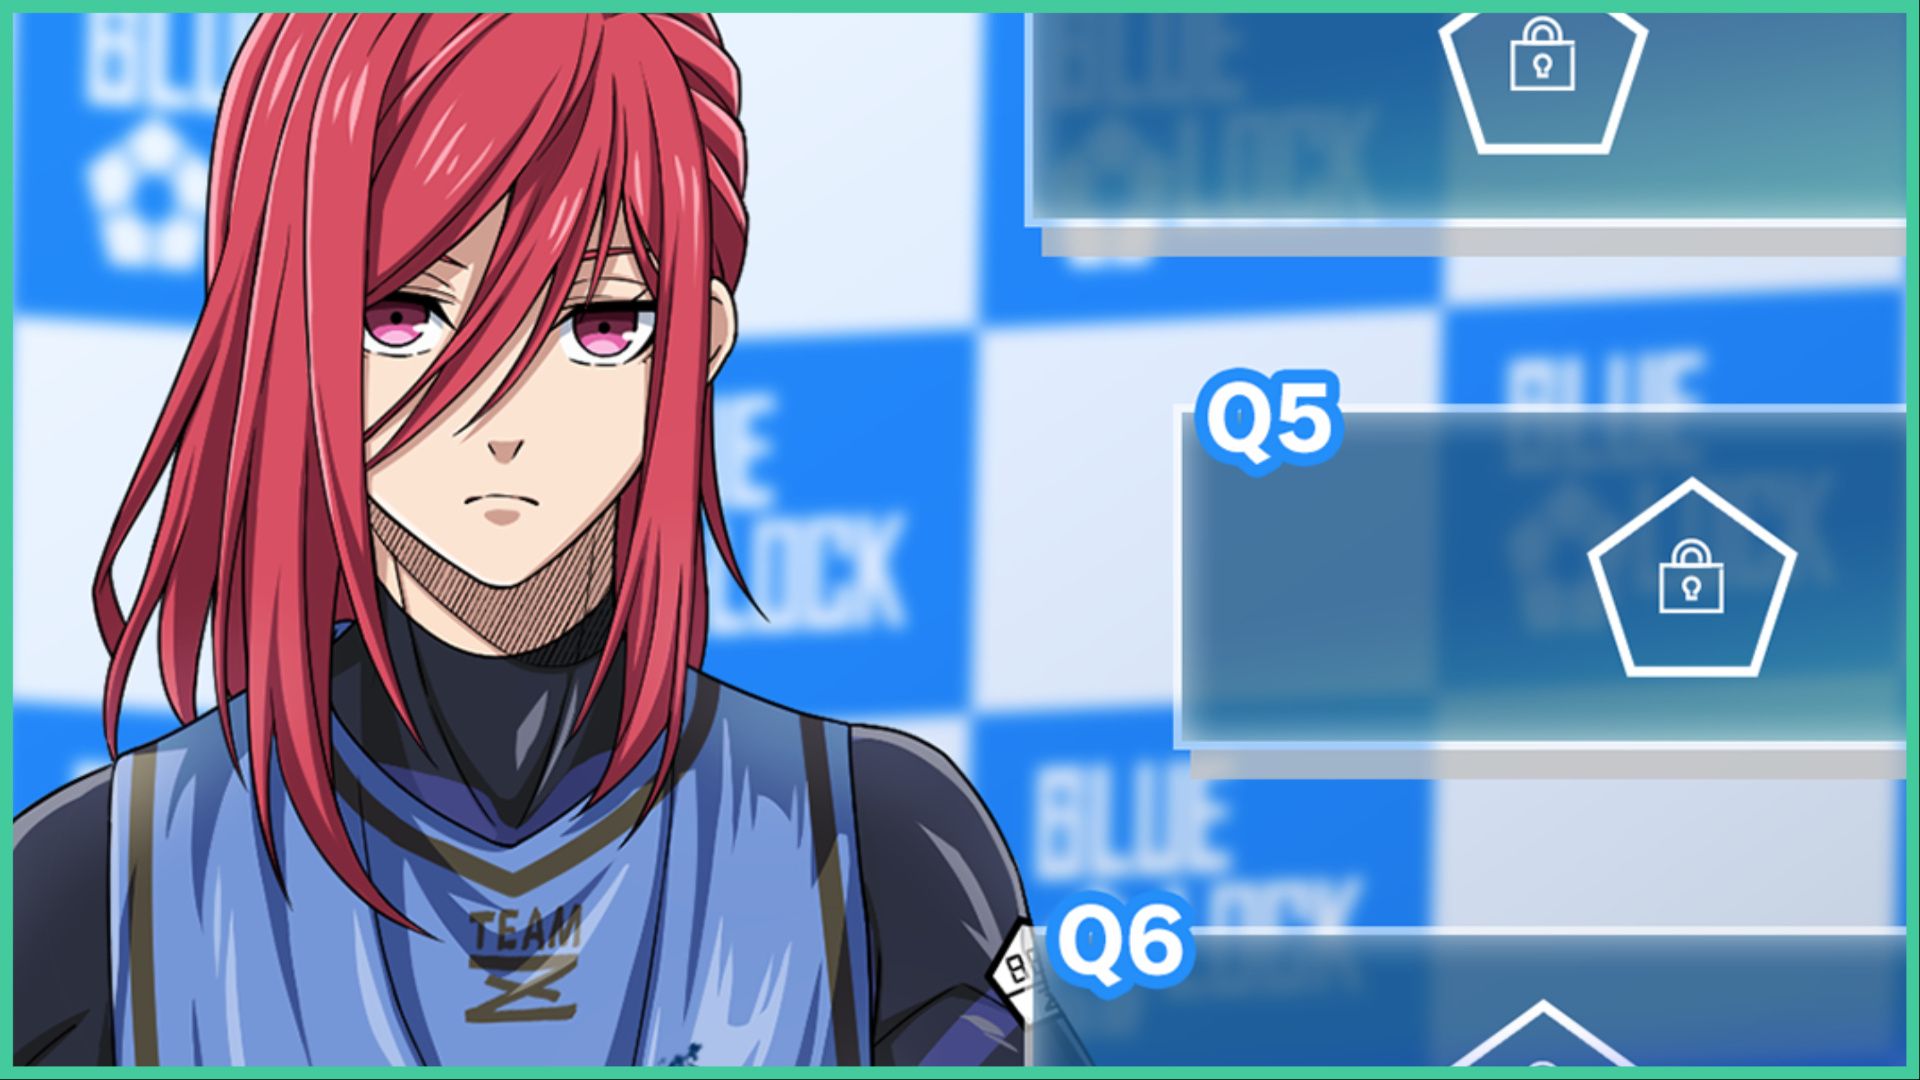 feature image for our blue lock blaze battle codes guide, the image features promo art of chigiri from the blue lock series looking disgruntled, there are empty boxes with the blue lock logo with a padlock inside